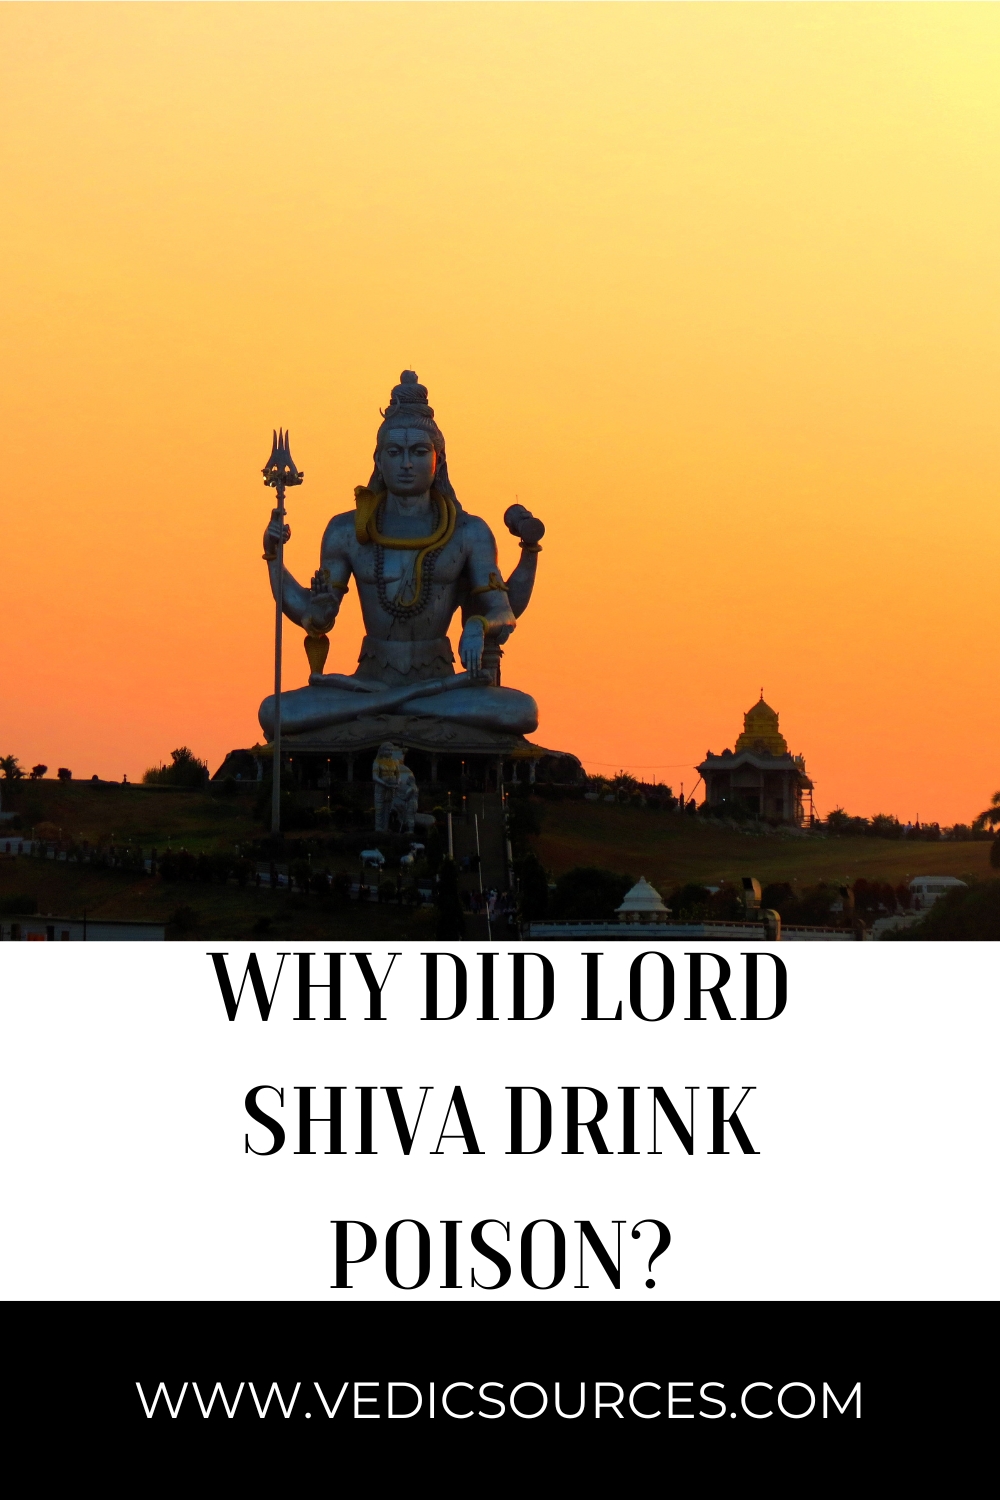 Why Did Lord Shiva Drink Poison?